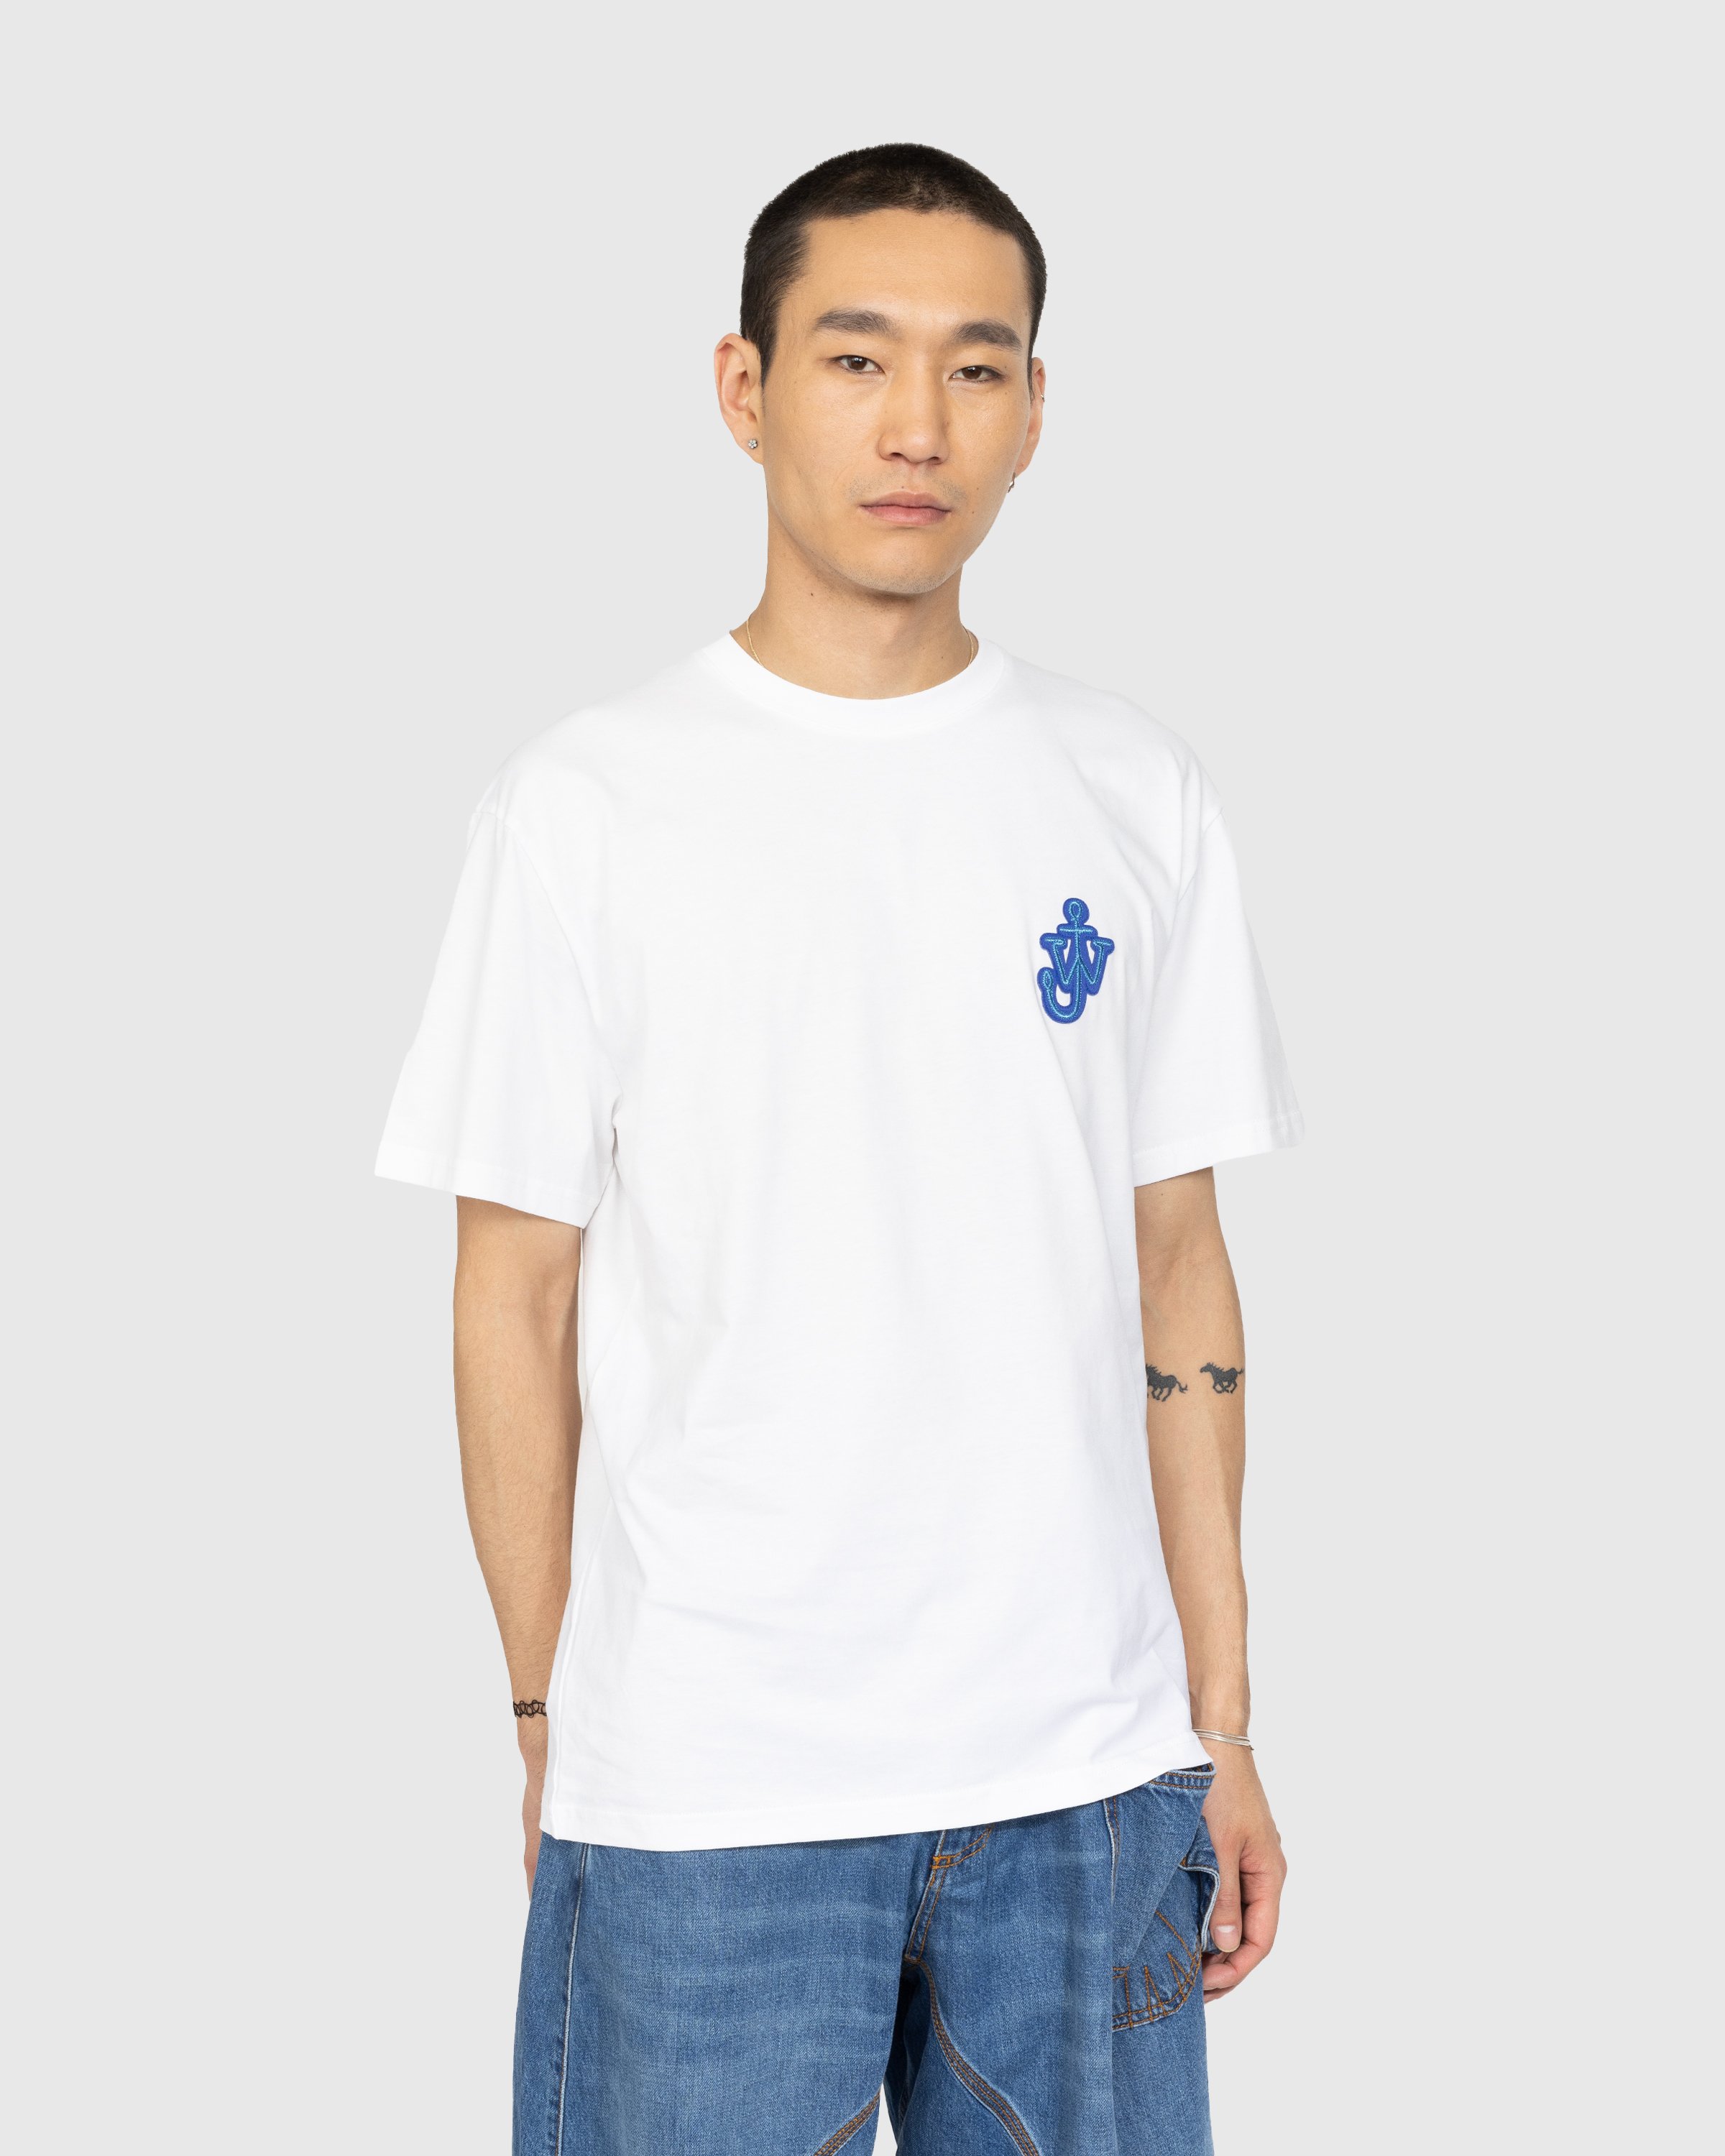 J.W. Anderson - Anchor Patch T-Shirt White - Clothing - White - Image 2